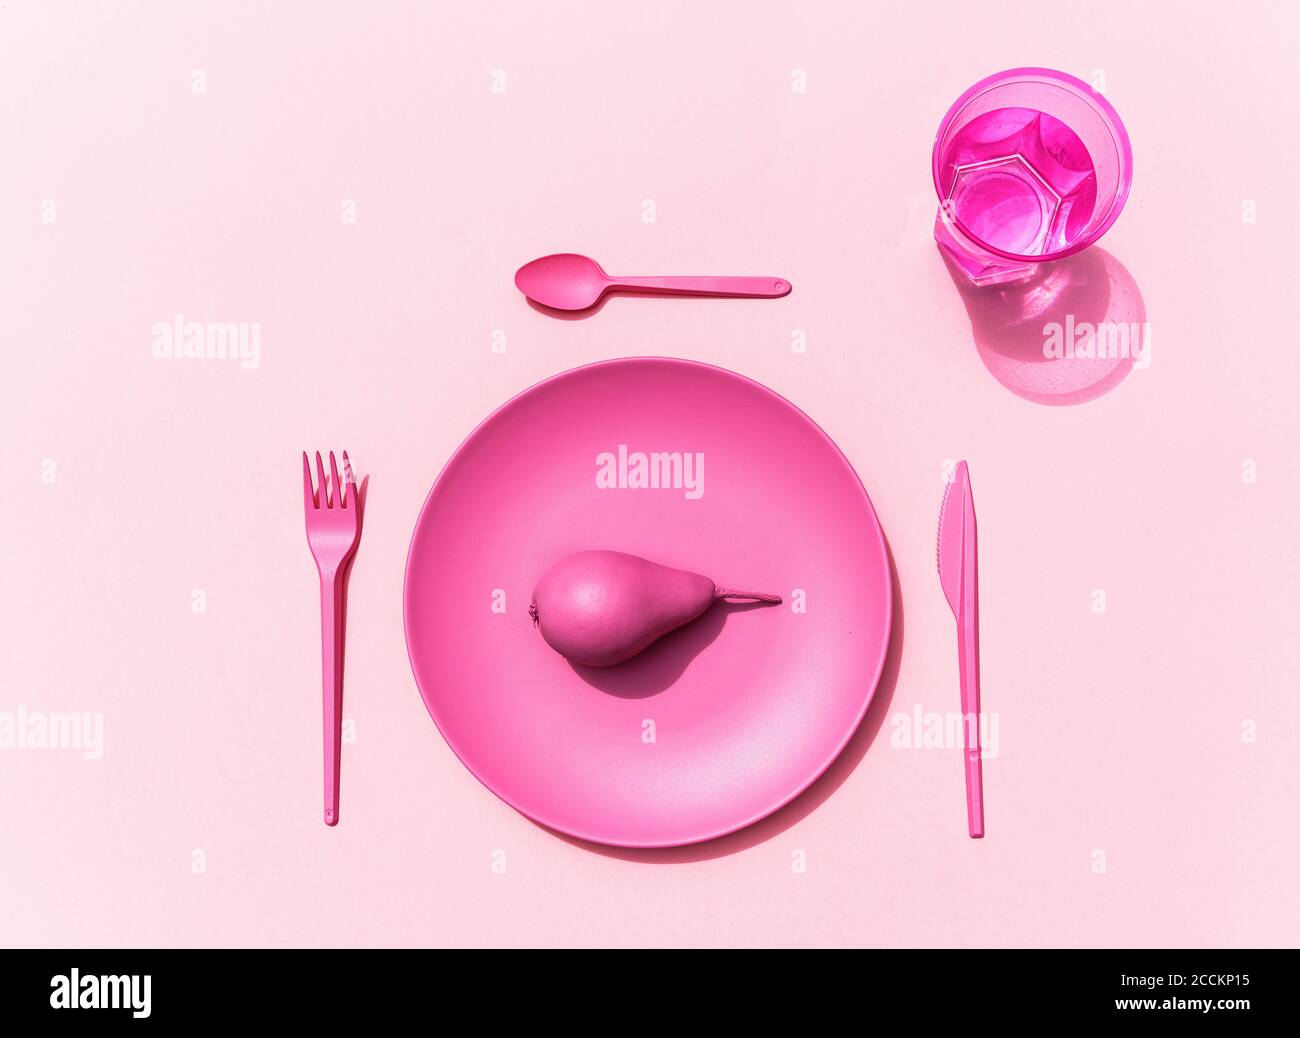 Studio shot of pink plastic plate, plastic cutlery, glass of water and pink pear Stock Photo